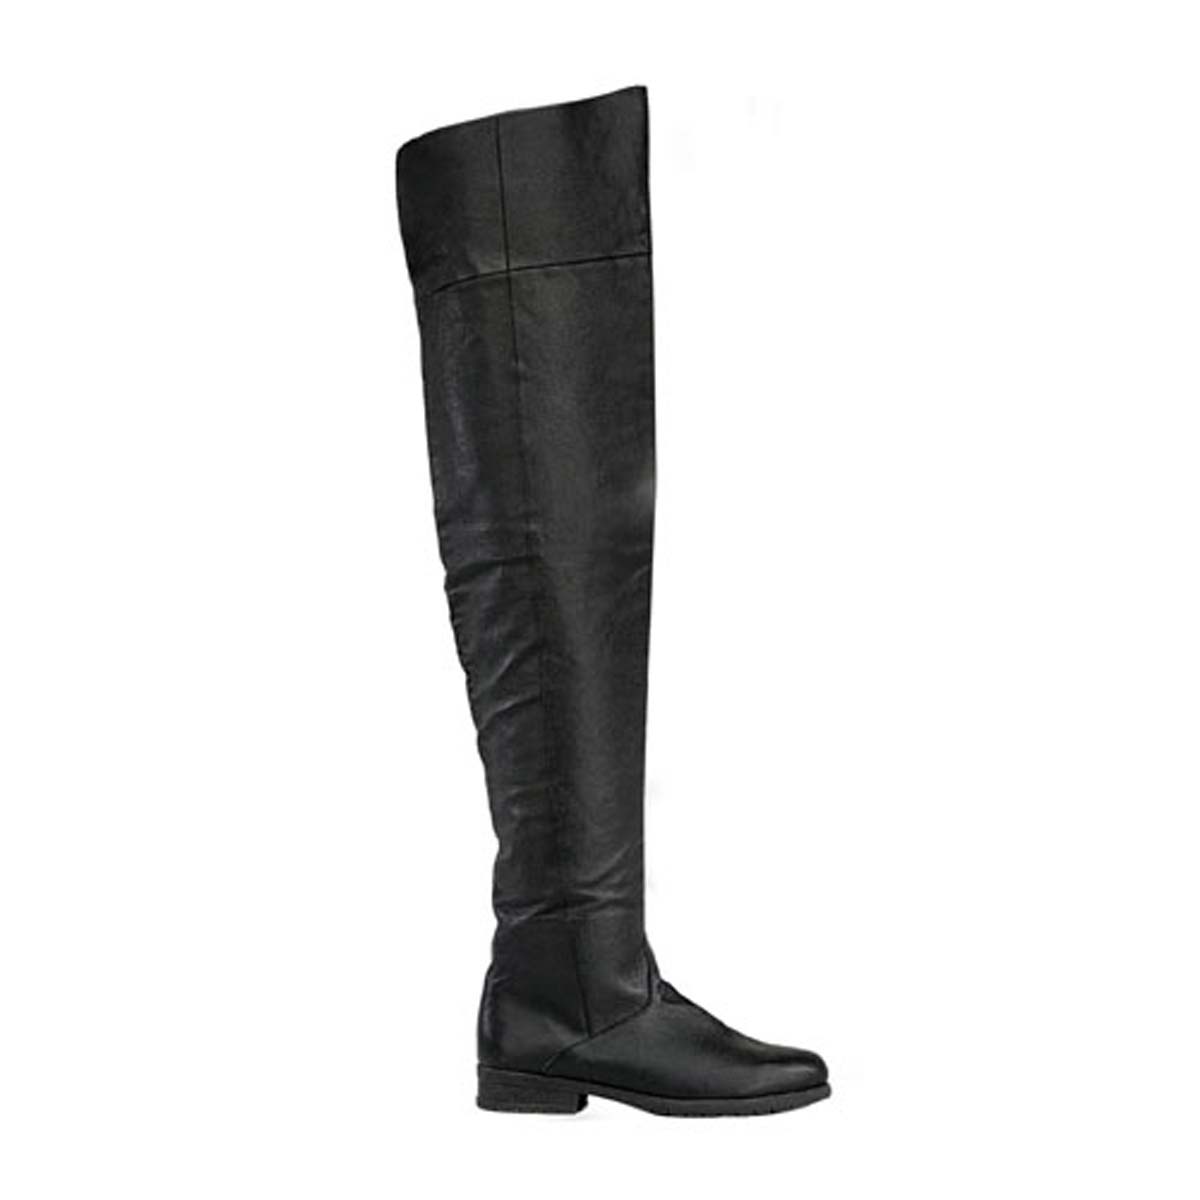 Pleaser Maverick-8824 - Black Leather (P) in Sexy Boots - $121.43